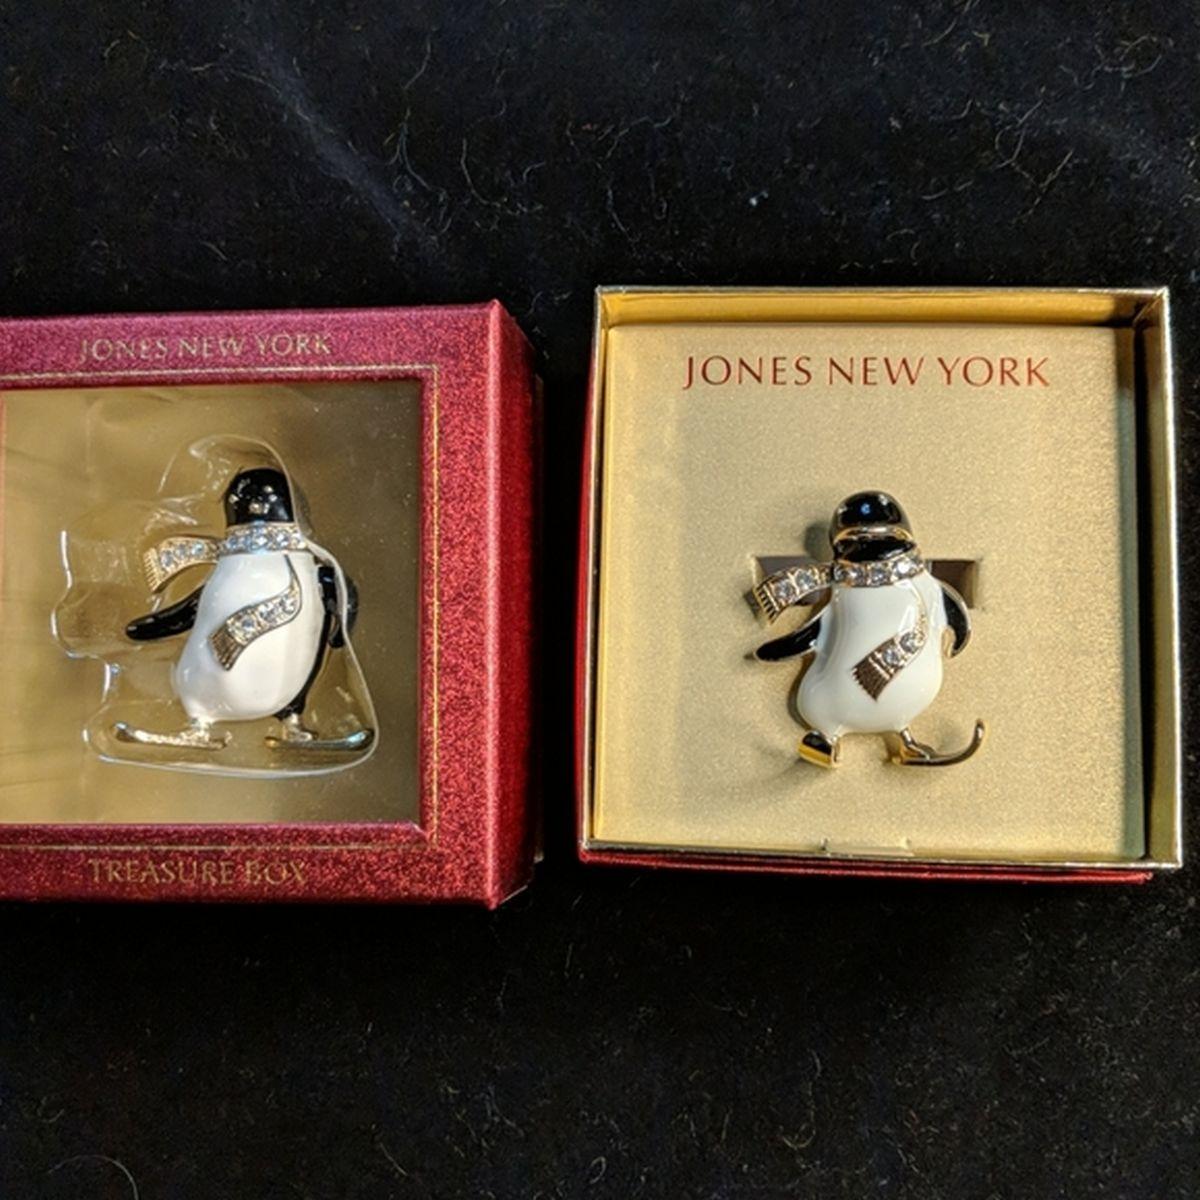 Simply Wonderful! Penguins with Sassy Personality! Vintage Jones New York Penguin Enamel and Crystal Brooch Pin and Penguin Treasure Box. Penguin Brooch measures approx. 1.5